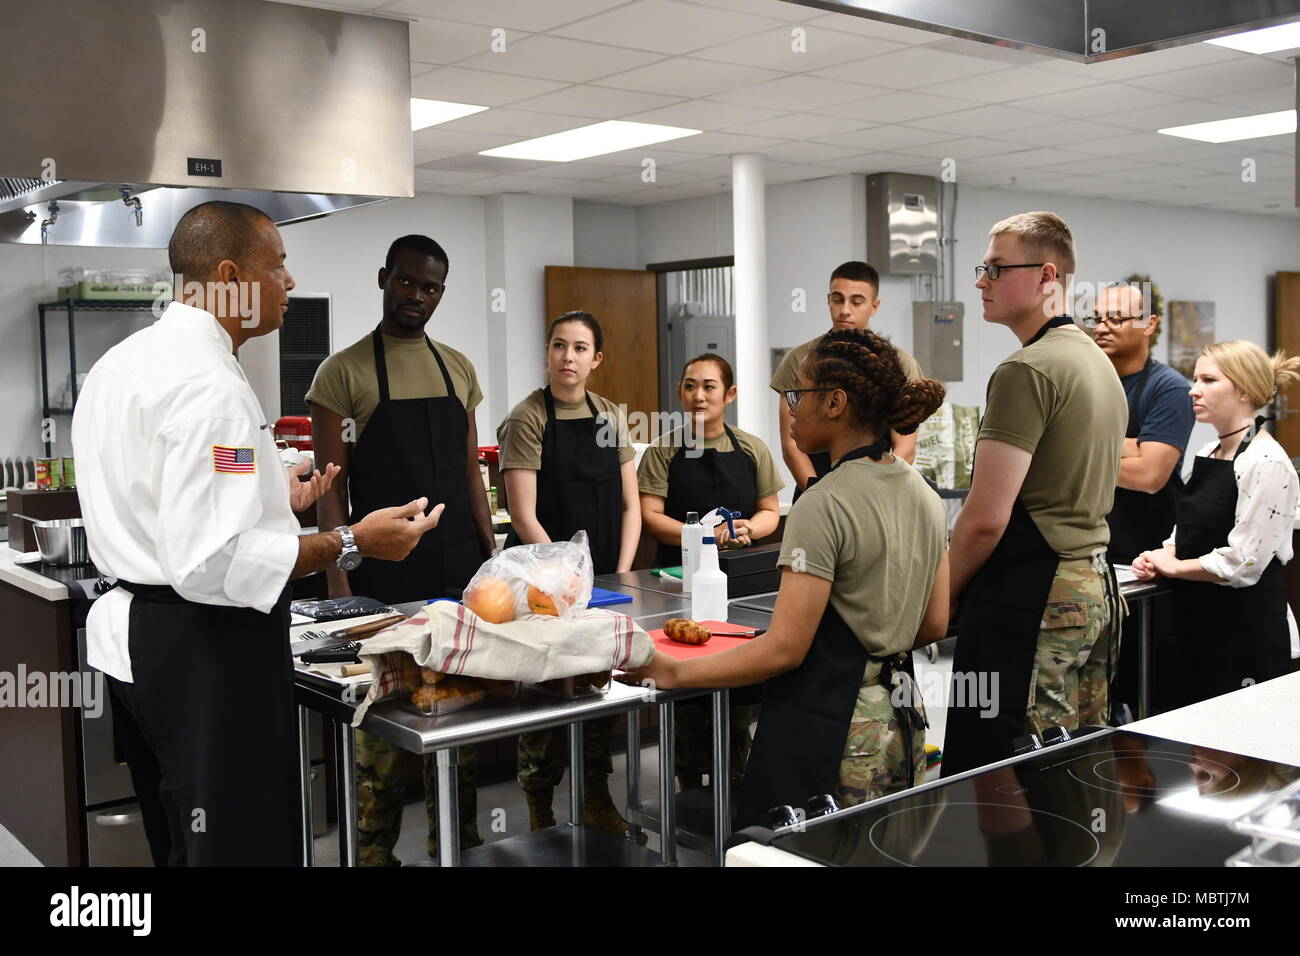 Sgt. 1st Class Raphael B. Bonair, Executive Aide, U.S. Army North (Fifth Army) instruct students about knife utilization at the new teaching kitchen in the Vogel Resiliency Center. The Vogel Resiliency Center is a new facility bringing together eight entities of resiliency services into one location. This facility is unique to Fort Sam Houston and unique in the Army. The grand opening of the Vogel Resiliency Center was January 5, 2018. Stock Photo